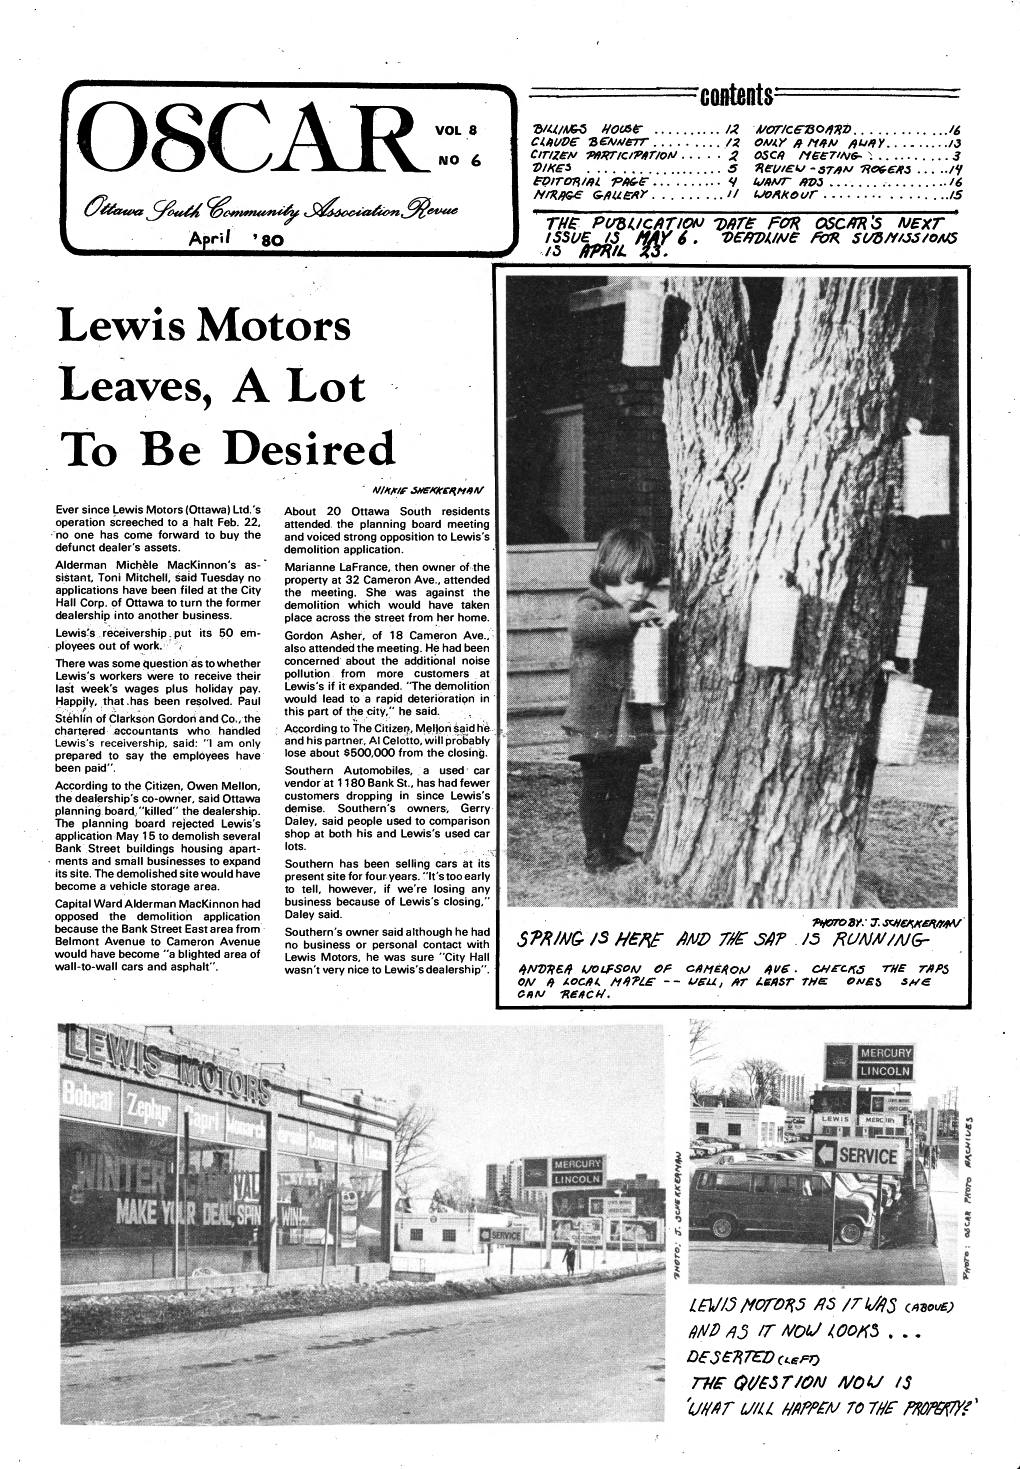 Lewis Motors Leaves, a Lot to Be Desired N/R/F/E SNCKRERMAN